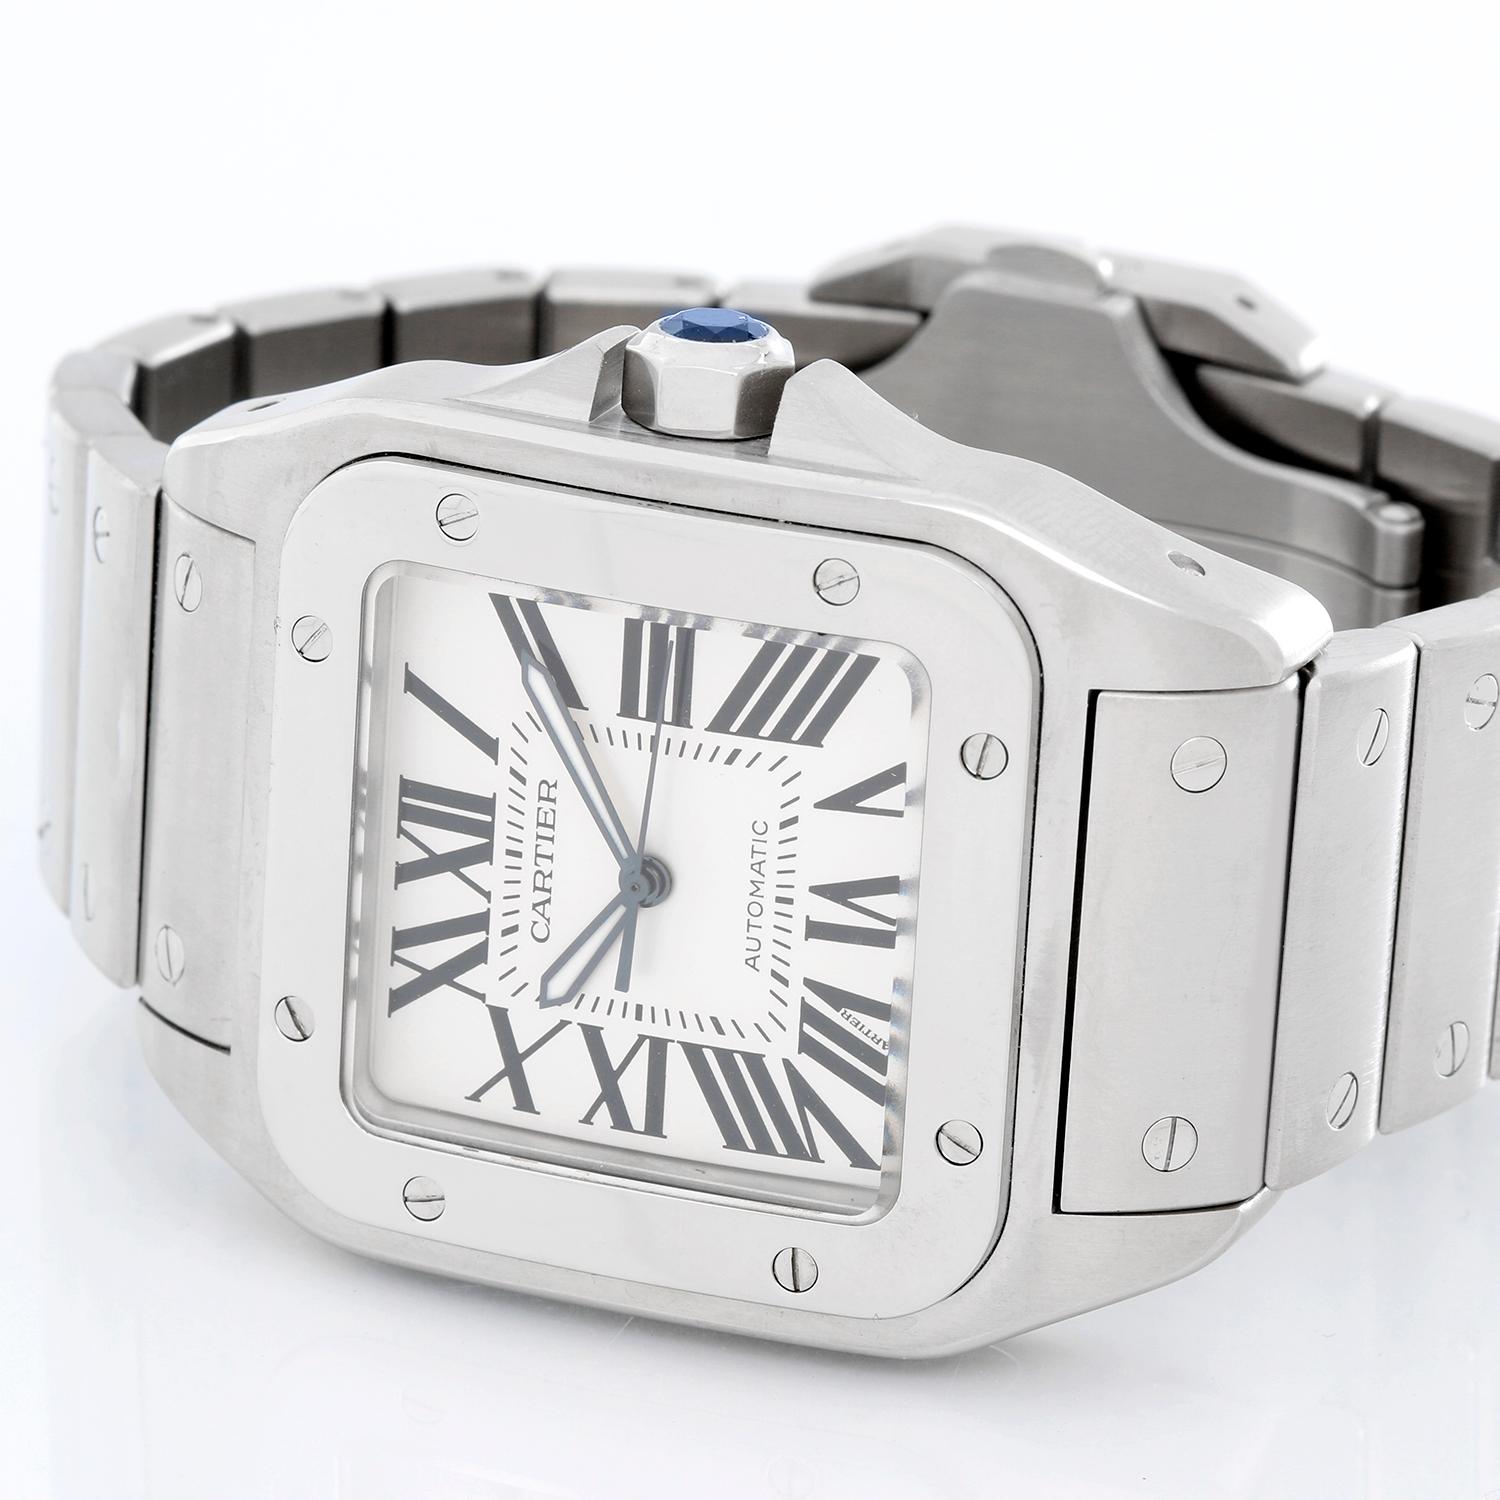 Cartier Santos 100 Steel Automatic Men's Watch W20073X8 - Automatic winding. Stainless steel case (38mm x 51mm). White dial with black Roman numerals. Stainless steel Cartier deployant style bracelet. Pre-owned with Cartier . 